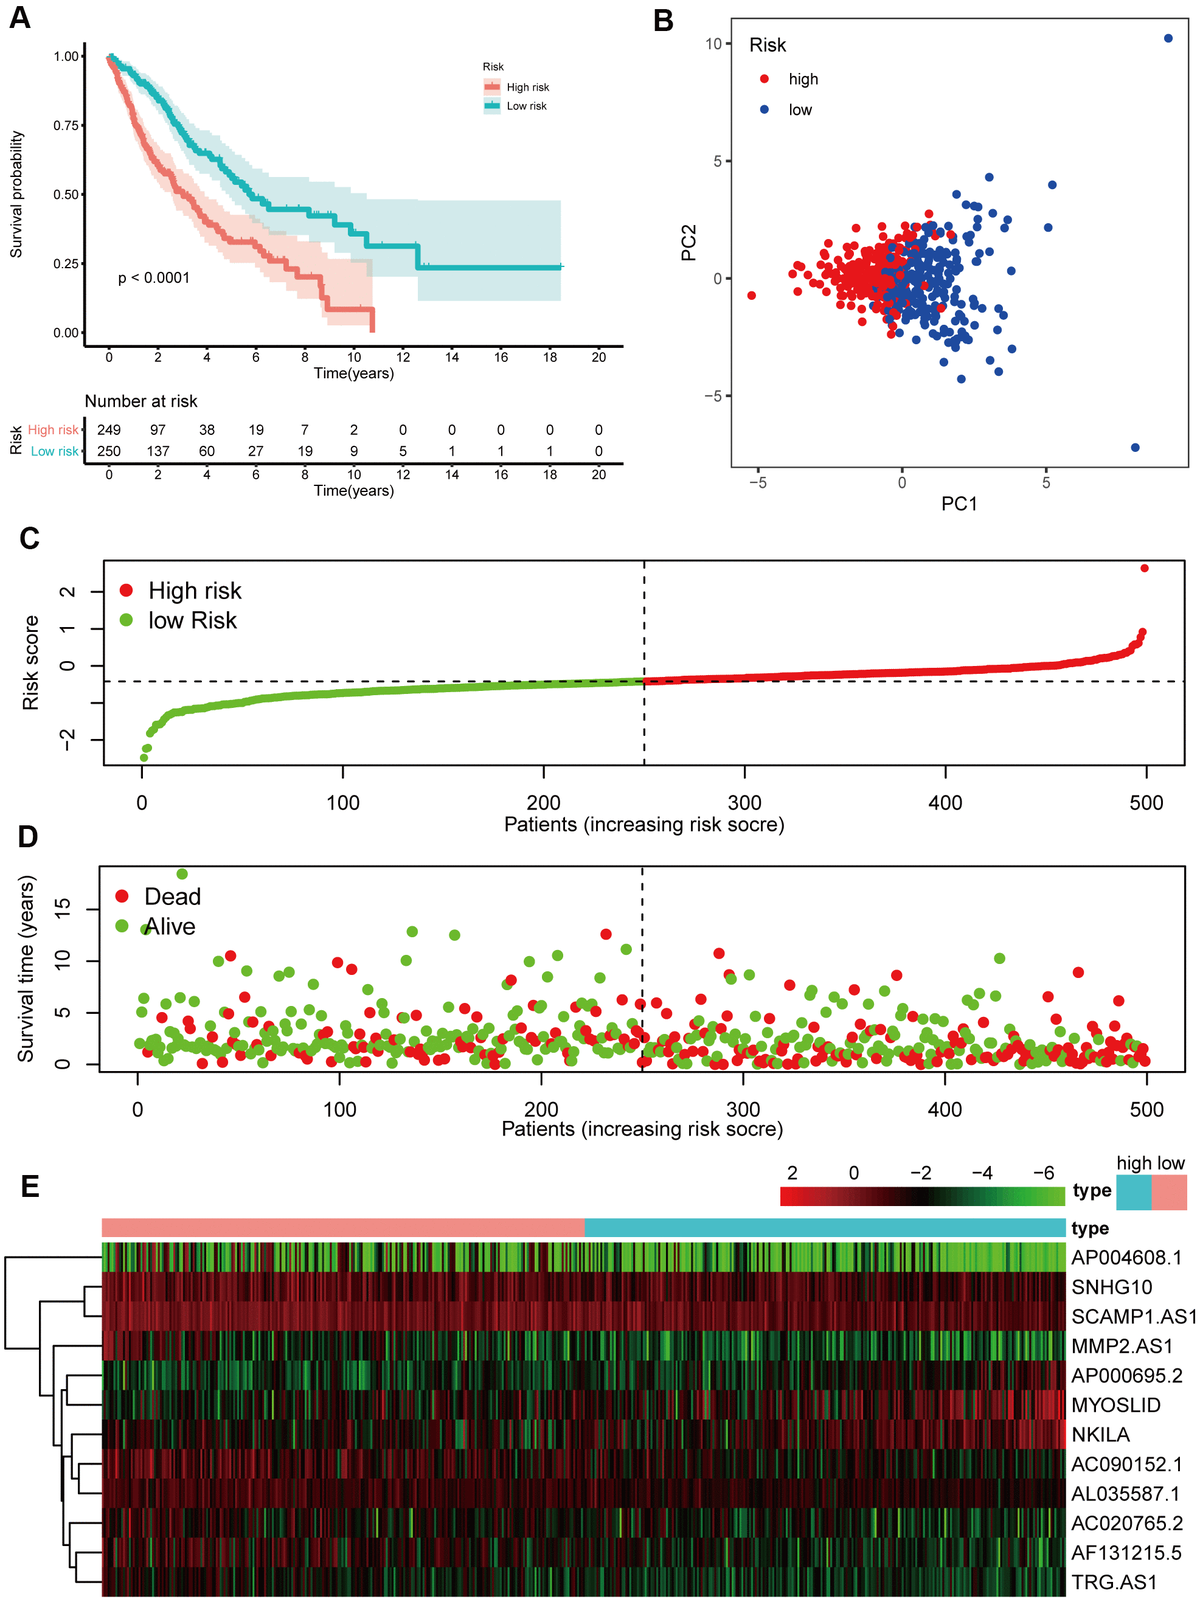 Prognostic analyses of the 12 NETs-related lncRNA signature model in the training cohort. (A) Kaplan–Meier survival analysis based on 12 NETs-related lncRNAs in the high-risk group and low-risk groups. (B) Principal component analysis (PCA) plot of the training cohort. (C) The distribution and median values of the risk scores in different groups. (D) The distributions of survival time in the training cohort. (E) Heatmap of the expression levels of the 12 lncRNAs related to OS.